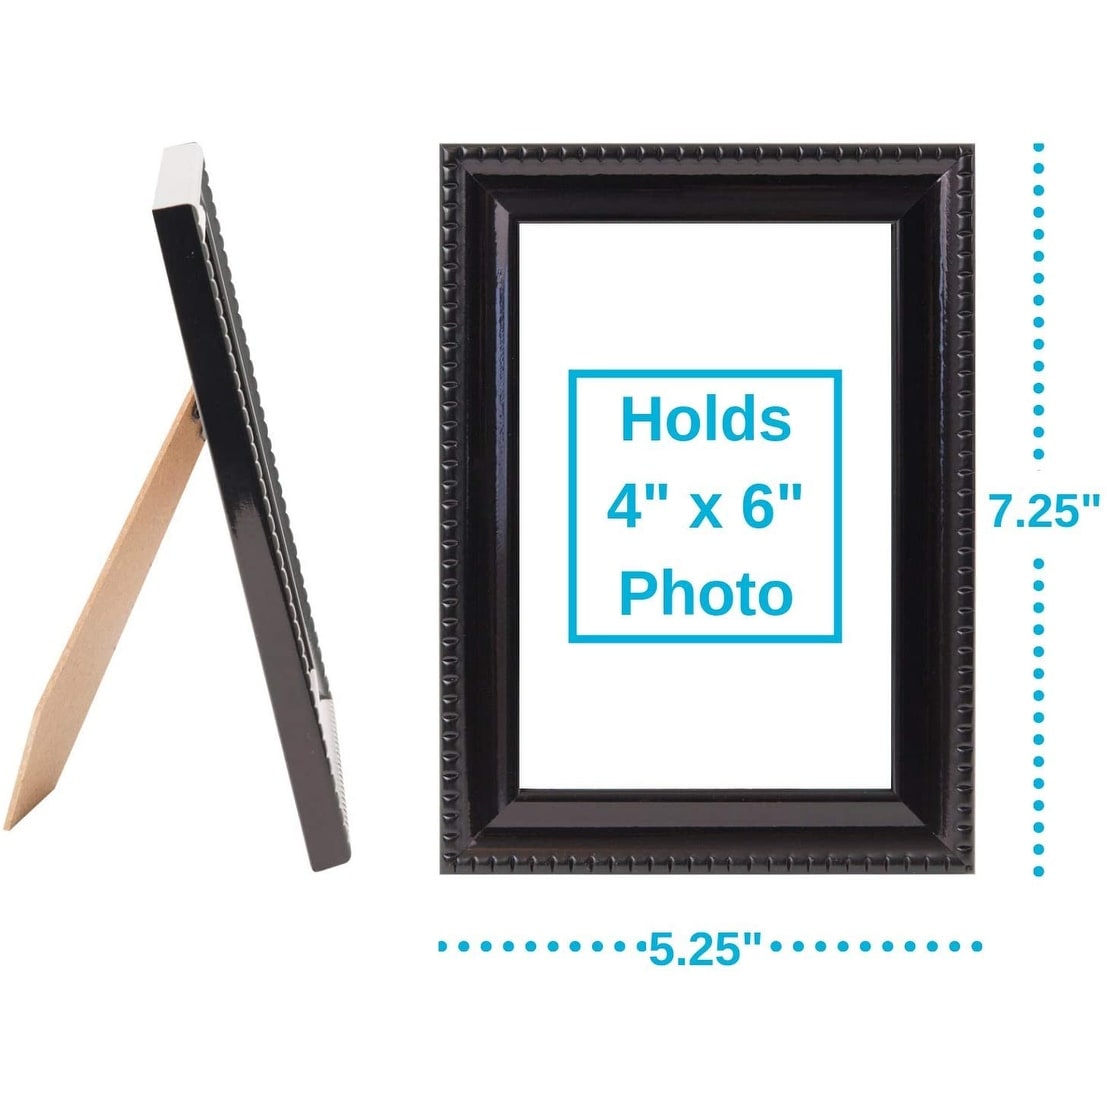 https://ak1.ostkcdn.com/images/products/is/images/direct/54da383af702f71f90eba2989d793fac86ab0cae/Houseables-Picture-Frame-Set%2C-12-Pack%2C-Black%2C-4x6-Inches.jpg